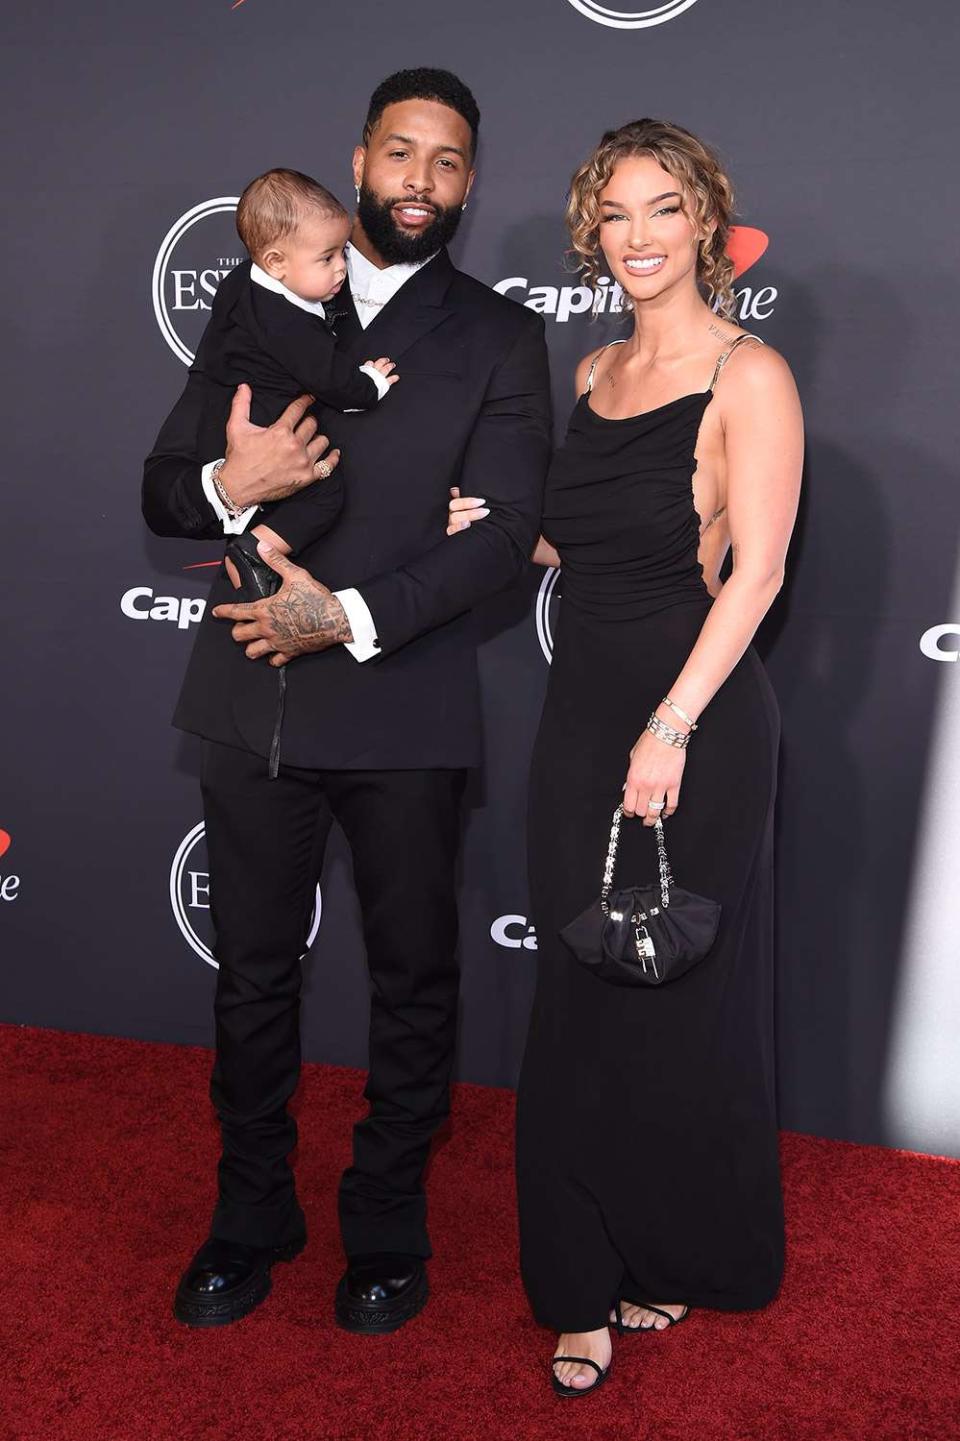 THE 2022 ESPYS PRESENTED BY CAPITAL ONE - The 2022 ESPYS Presented by Capital One is hosted by NBA superstar Stephen Curry. The ESPYS broadcasted live on ABC Wednesday, July 20, at 8 p.m. ET/PT from The Dolby Theatre in Los Angeles. (ABC via Getty Images) ODELL BECKHAM JR., LAUREN WOOD